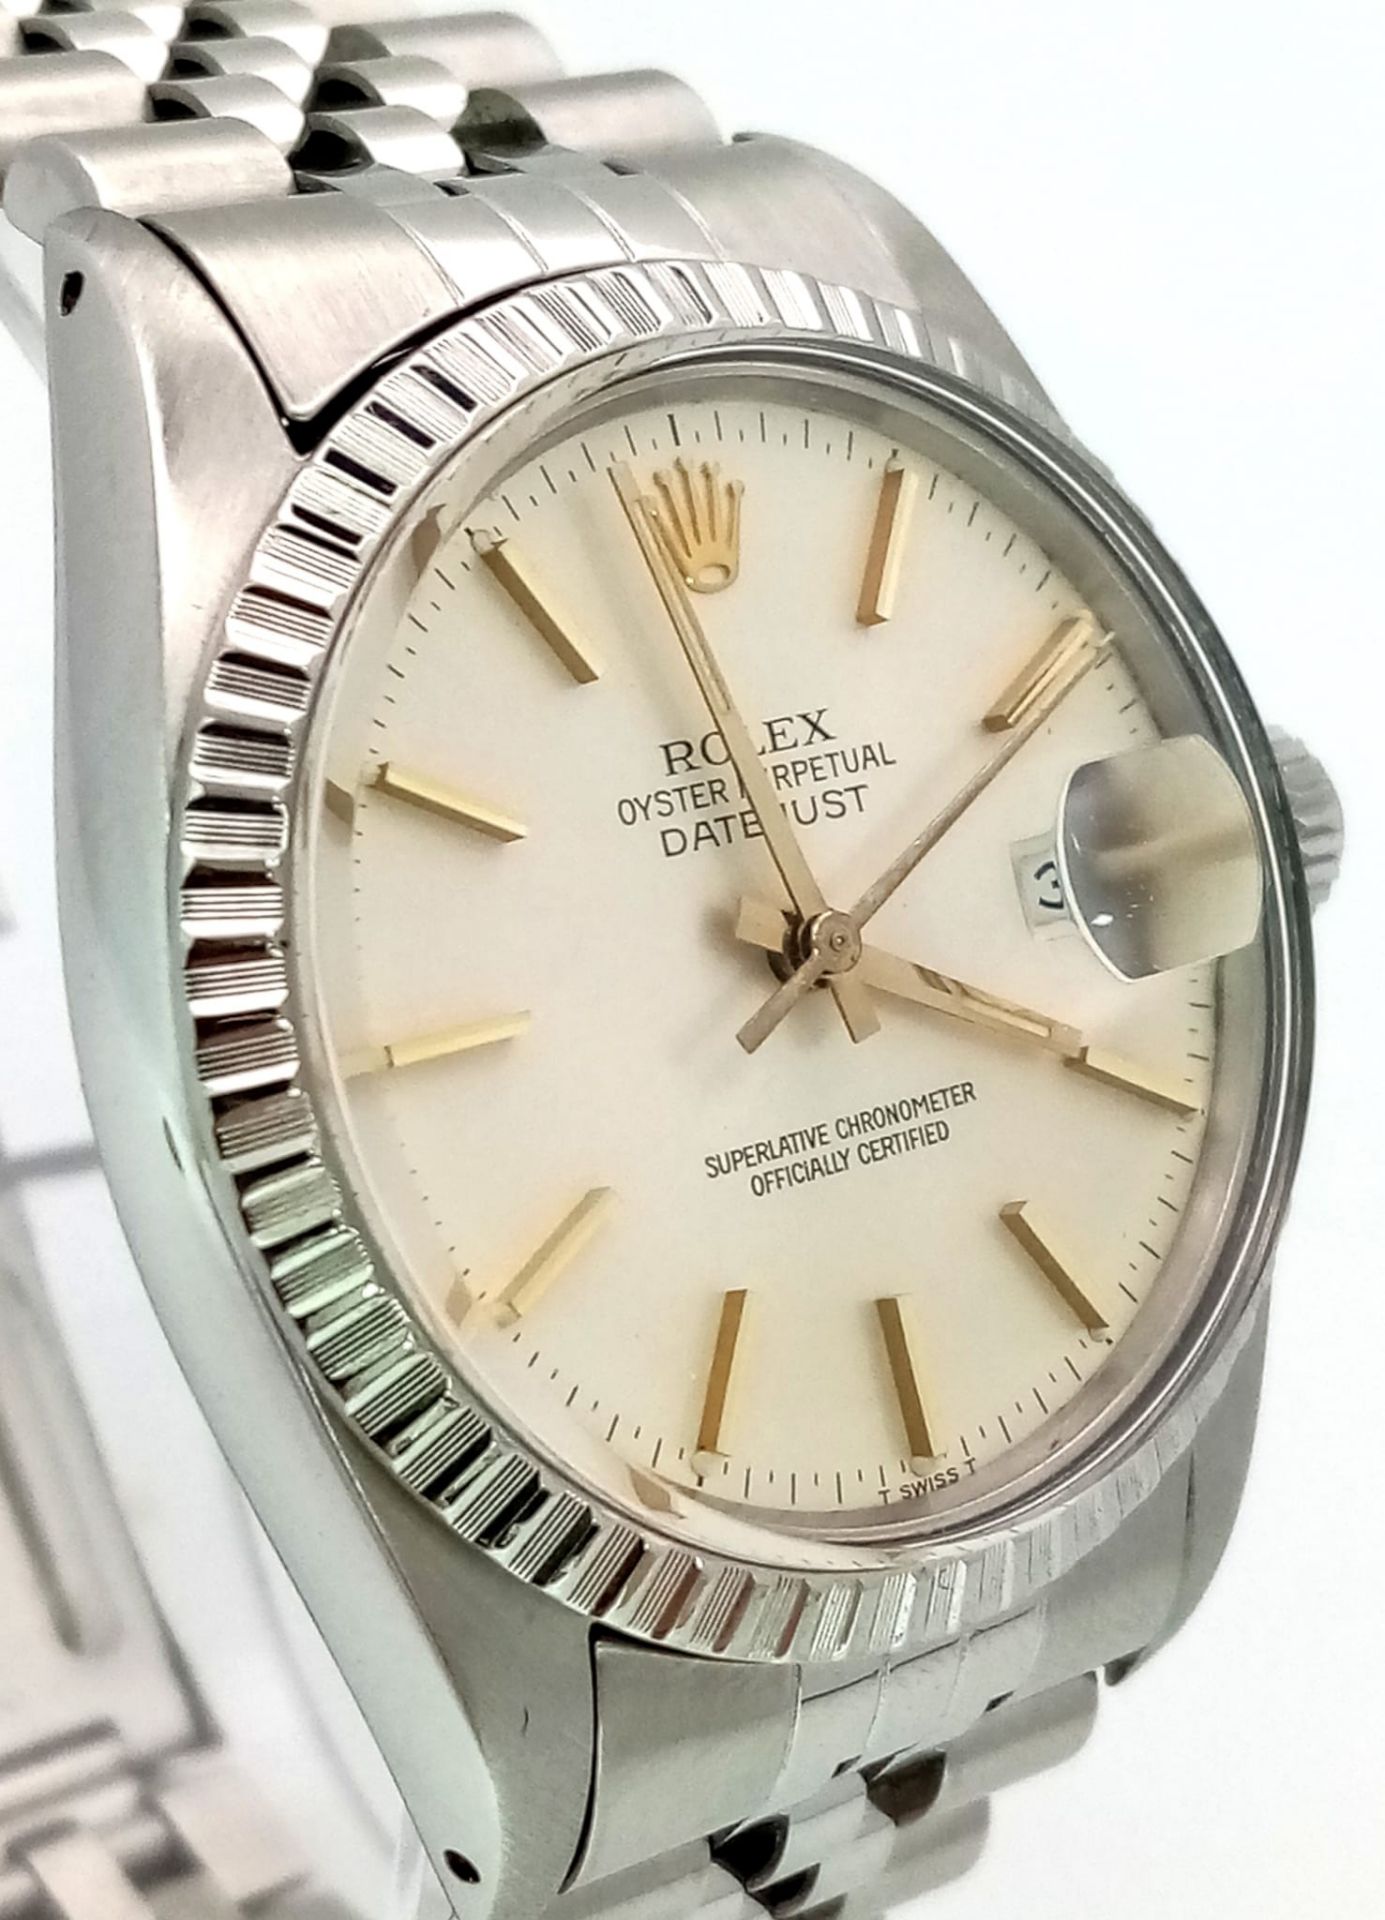 A Rolex Oyster Perpetual Datejust Gents Watch. Stainless steel strap and case - 36mm. Light gilded - Bild 3 aus 9